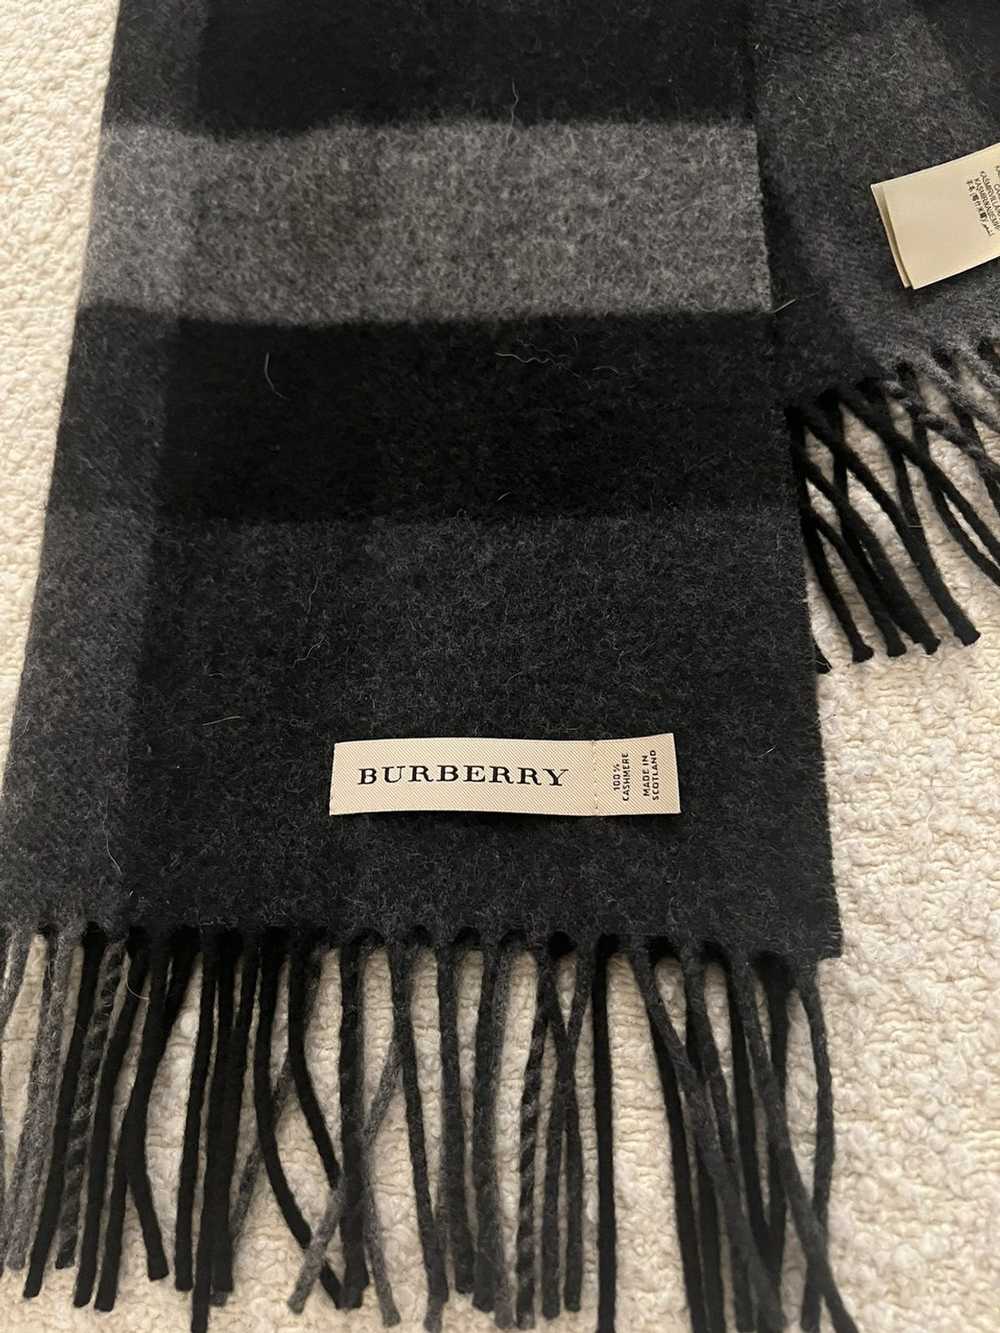 Burberry Burberry Check Cashmere Scarf in Charcoal - image 3